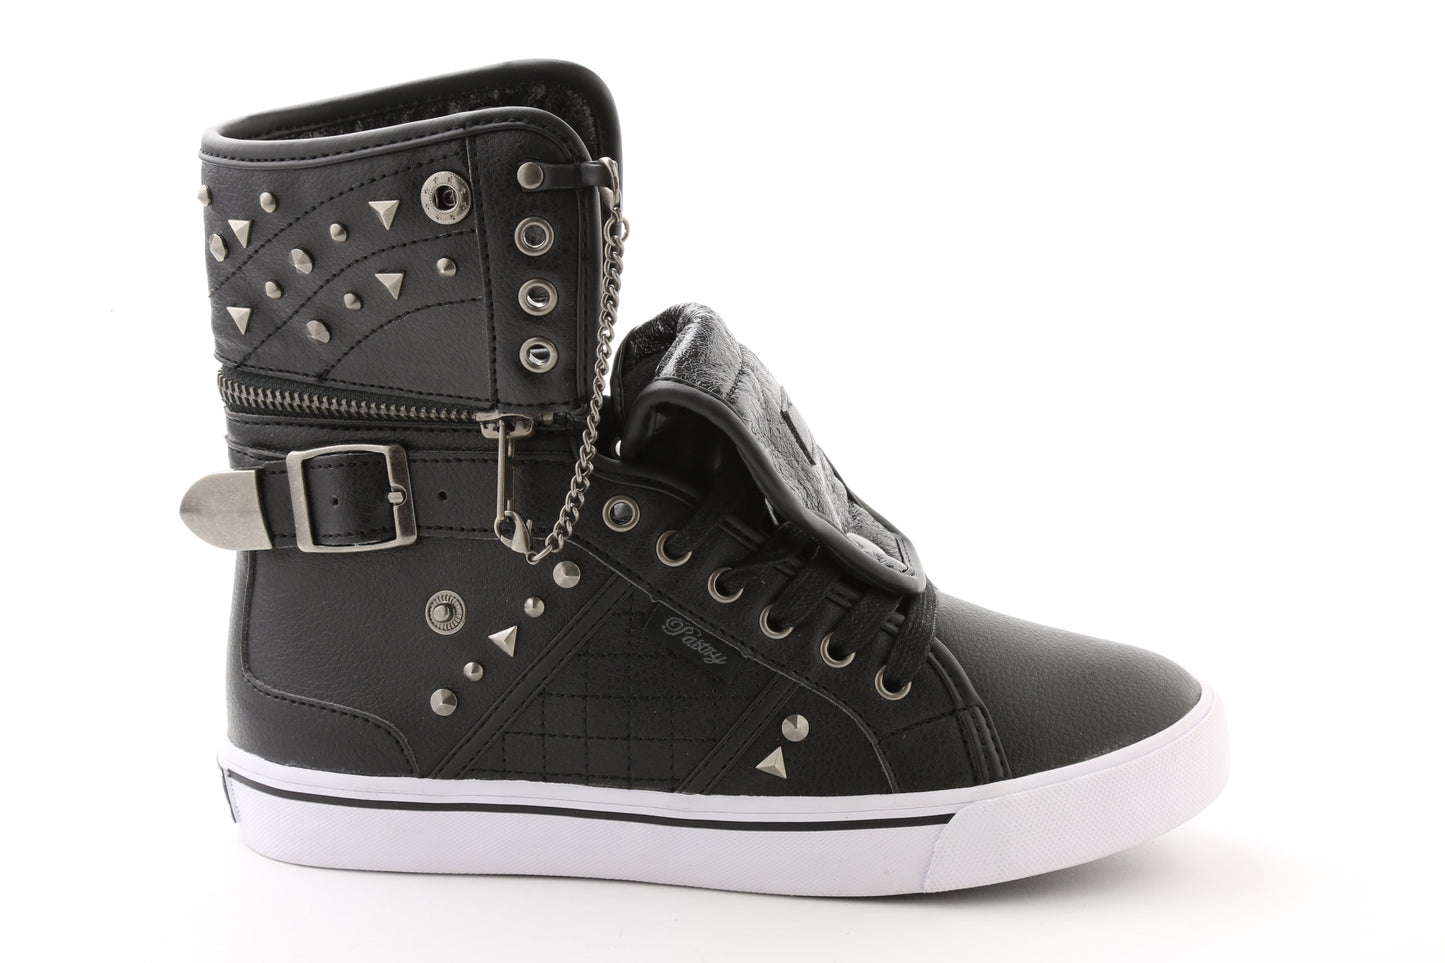 Pastry Sugar Rush Adult Women's Sneaker in Black/White lateral view